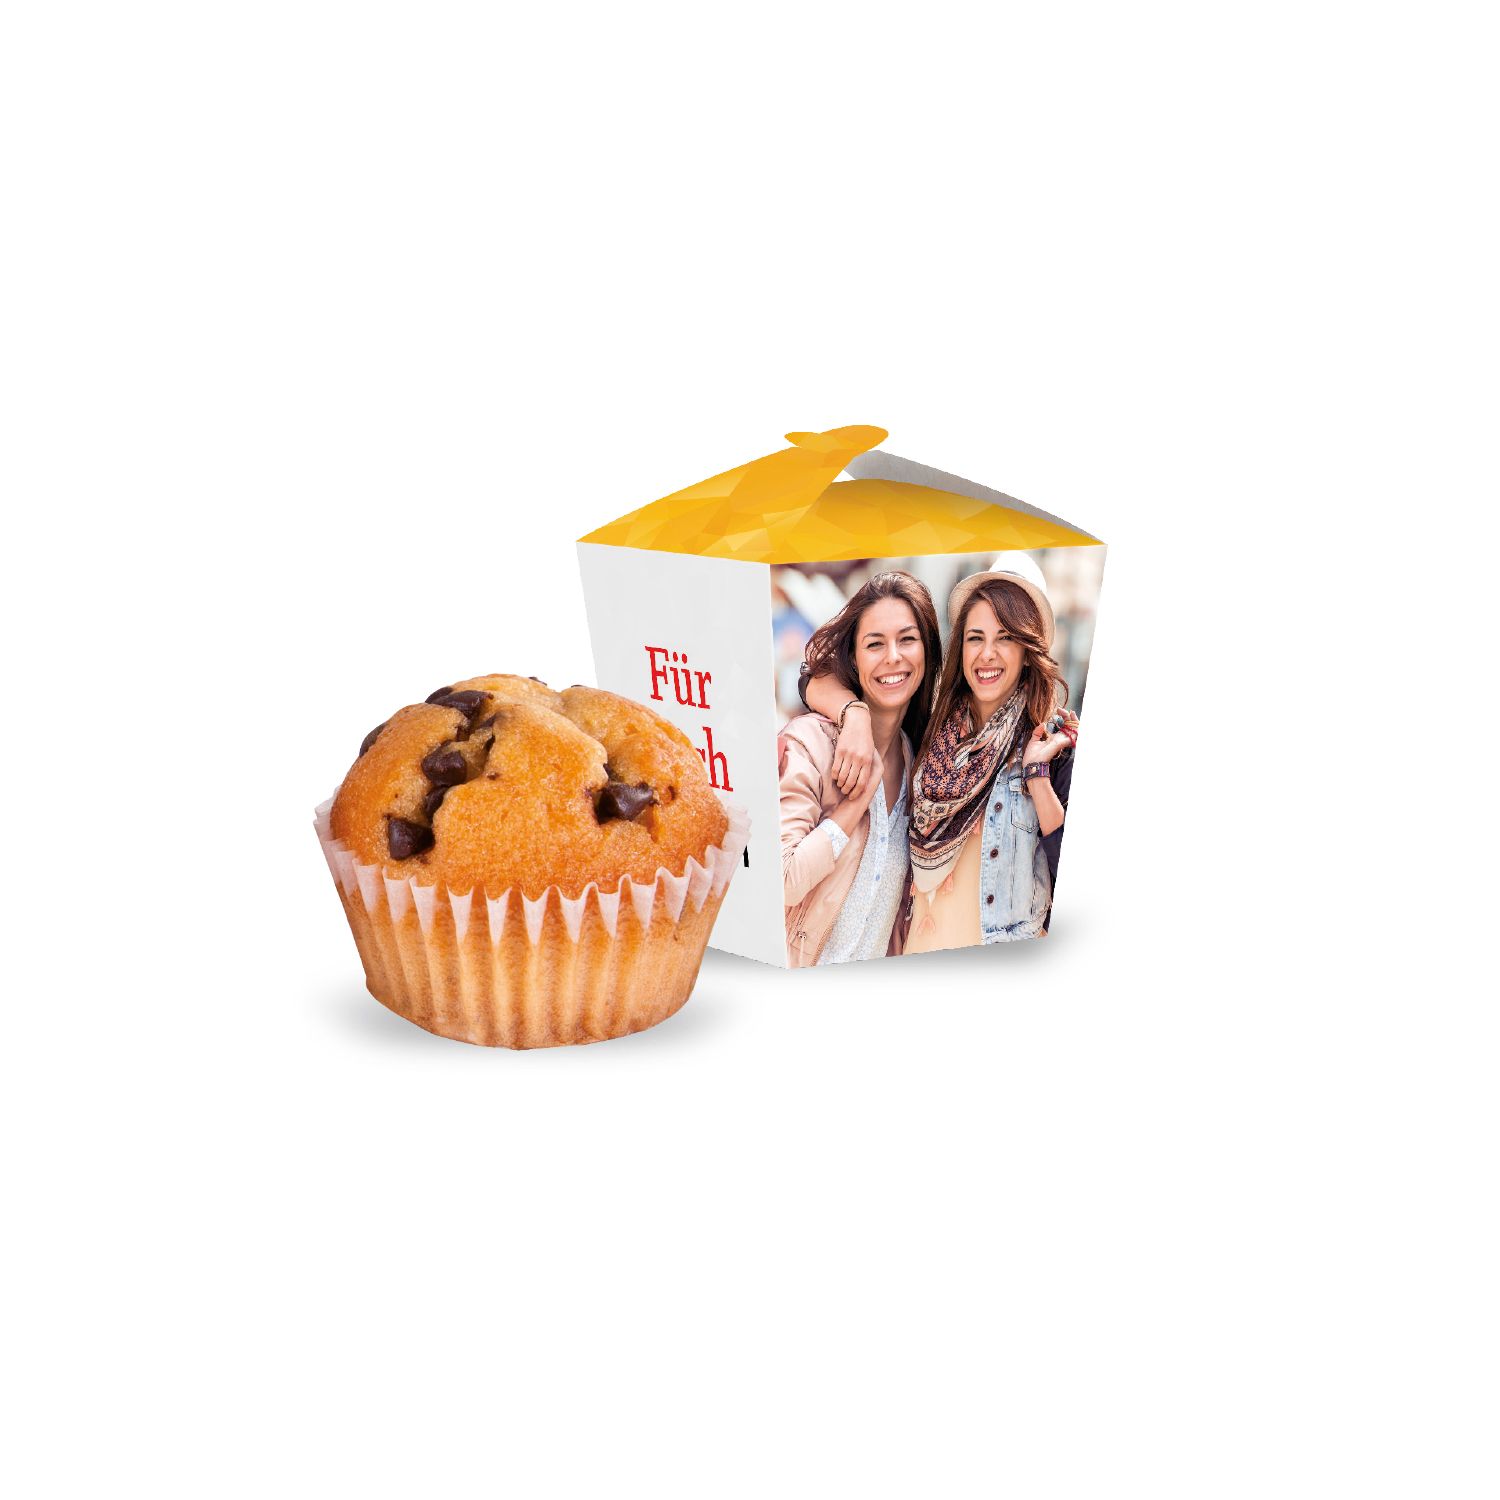 Muffin „Mini“ in Promotion Verpackung, inkl. 4-farbigem Druck